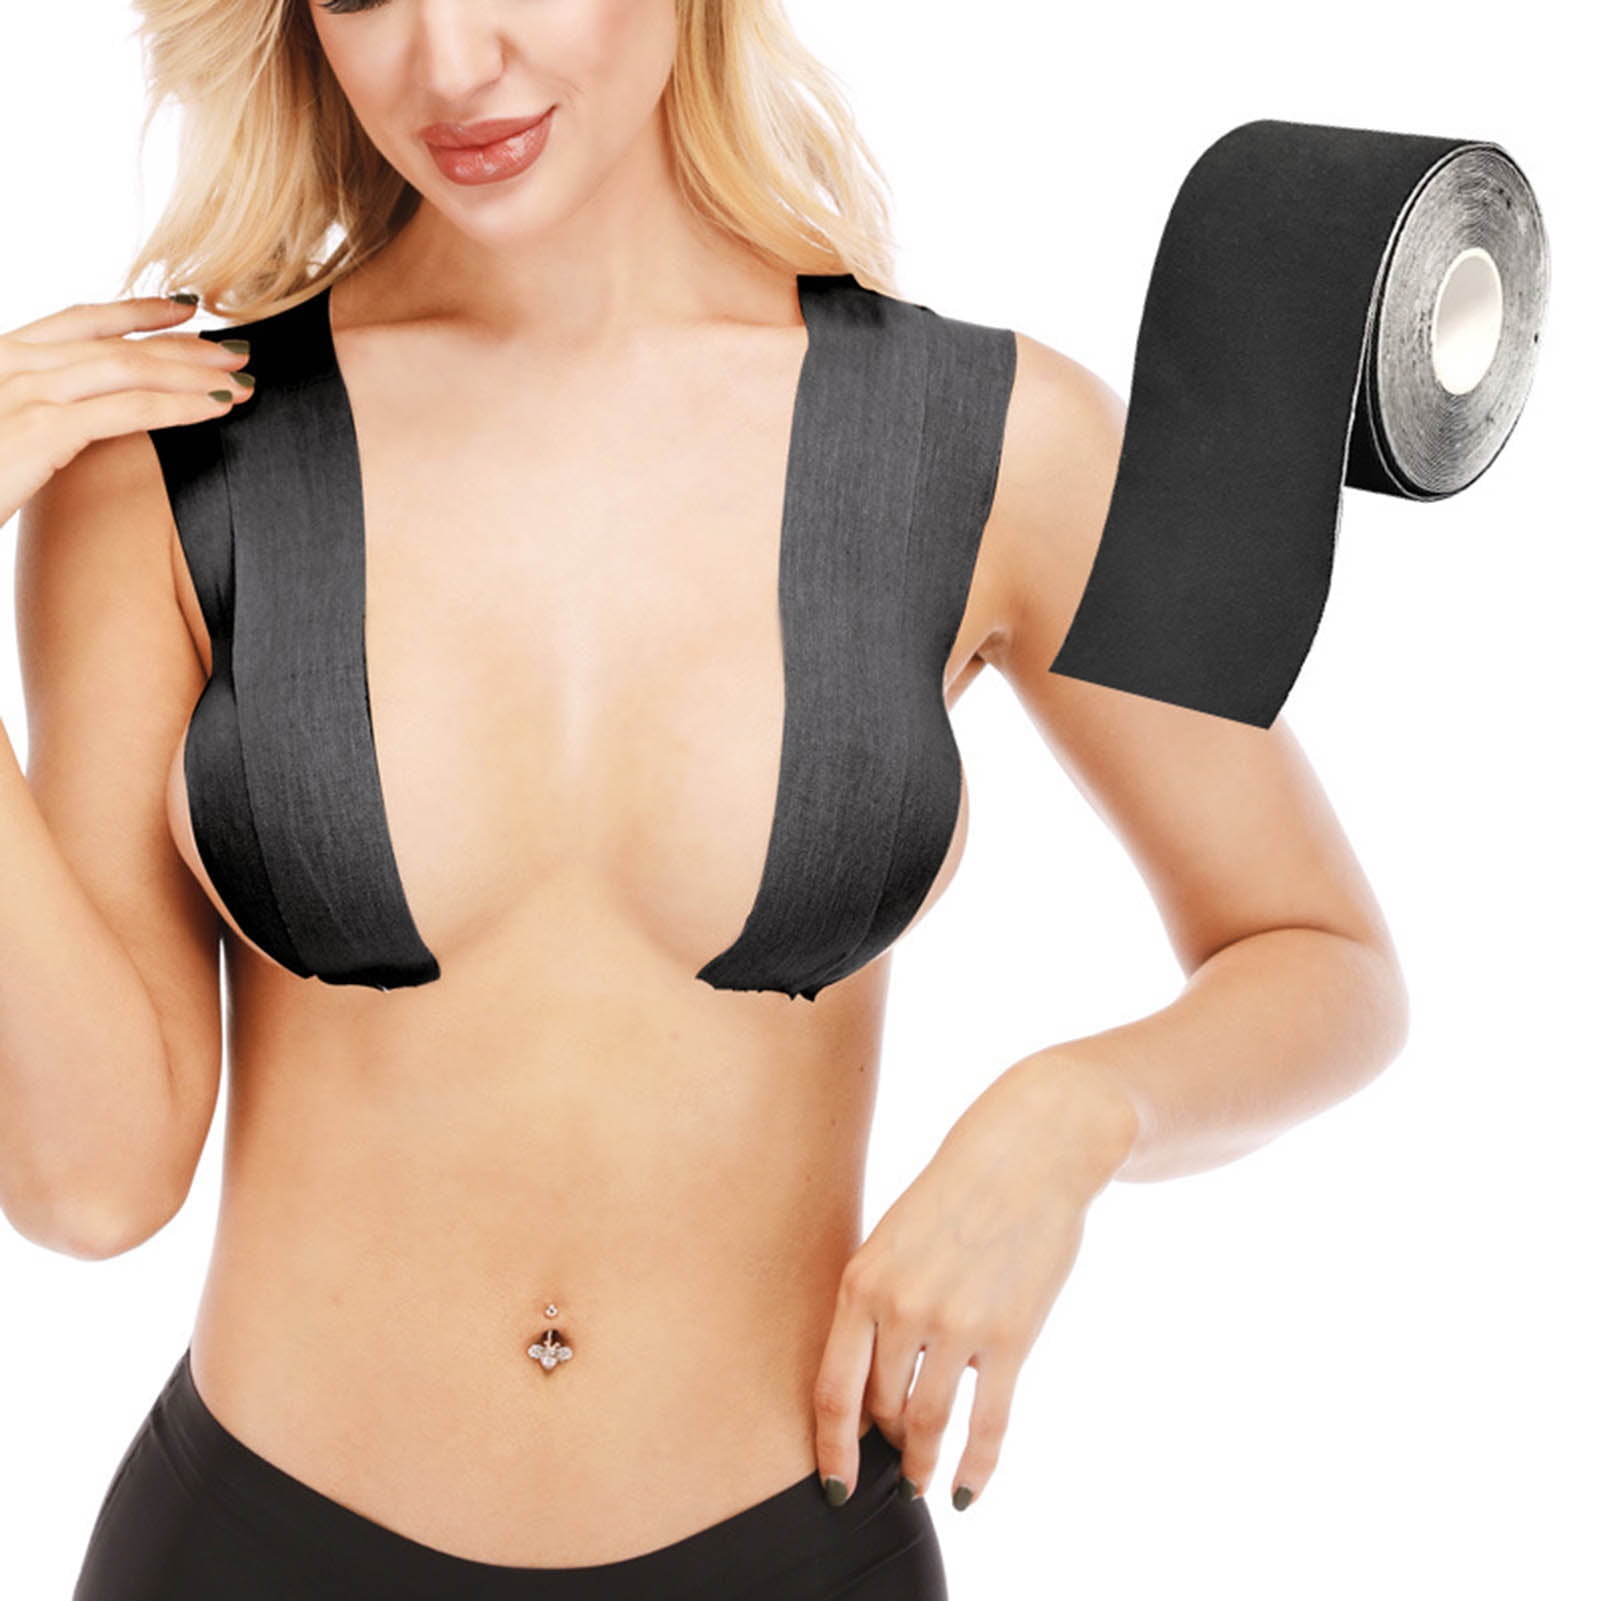 Invisible Adhesive Breast Lift Tape, Push Up Bra For Women, Boob Tape  Nipple Covers, Body Intimates Sexy Bralette From Yoochoice, $3.51